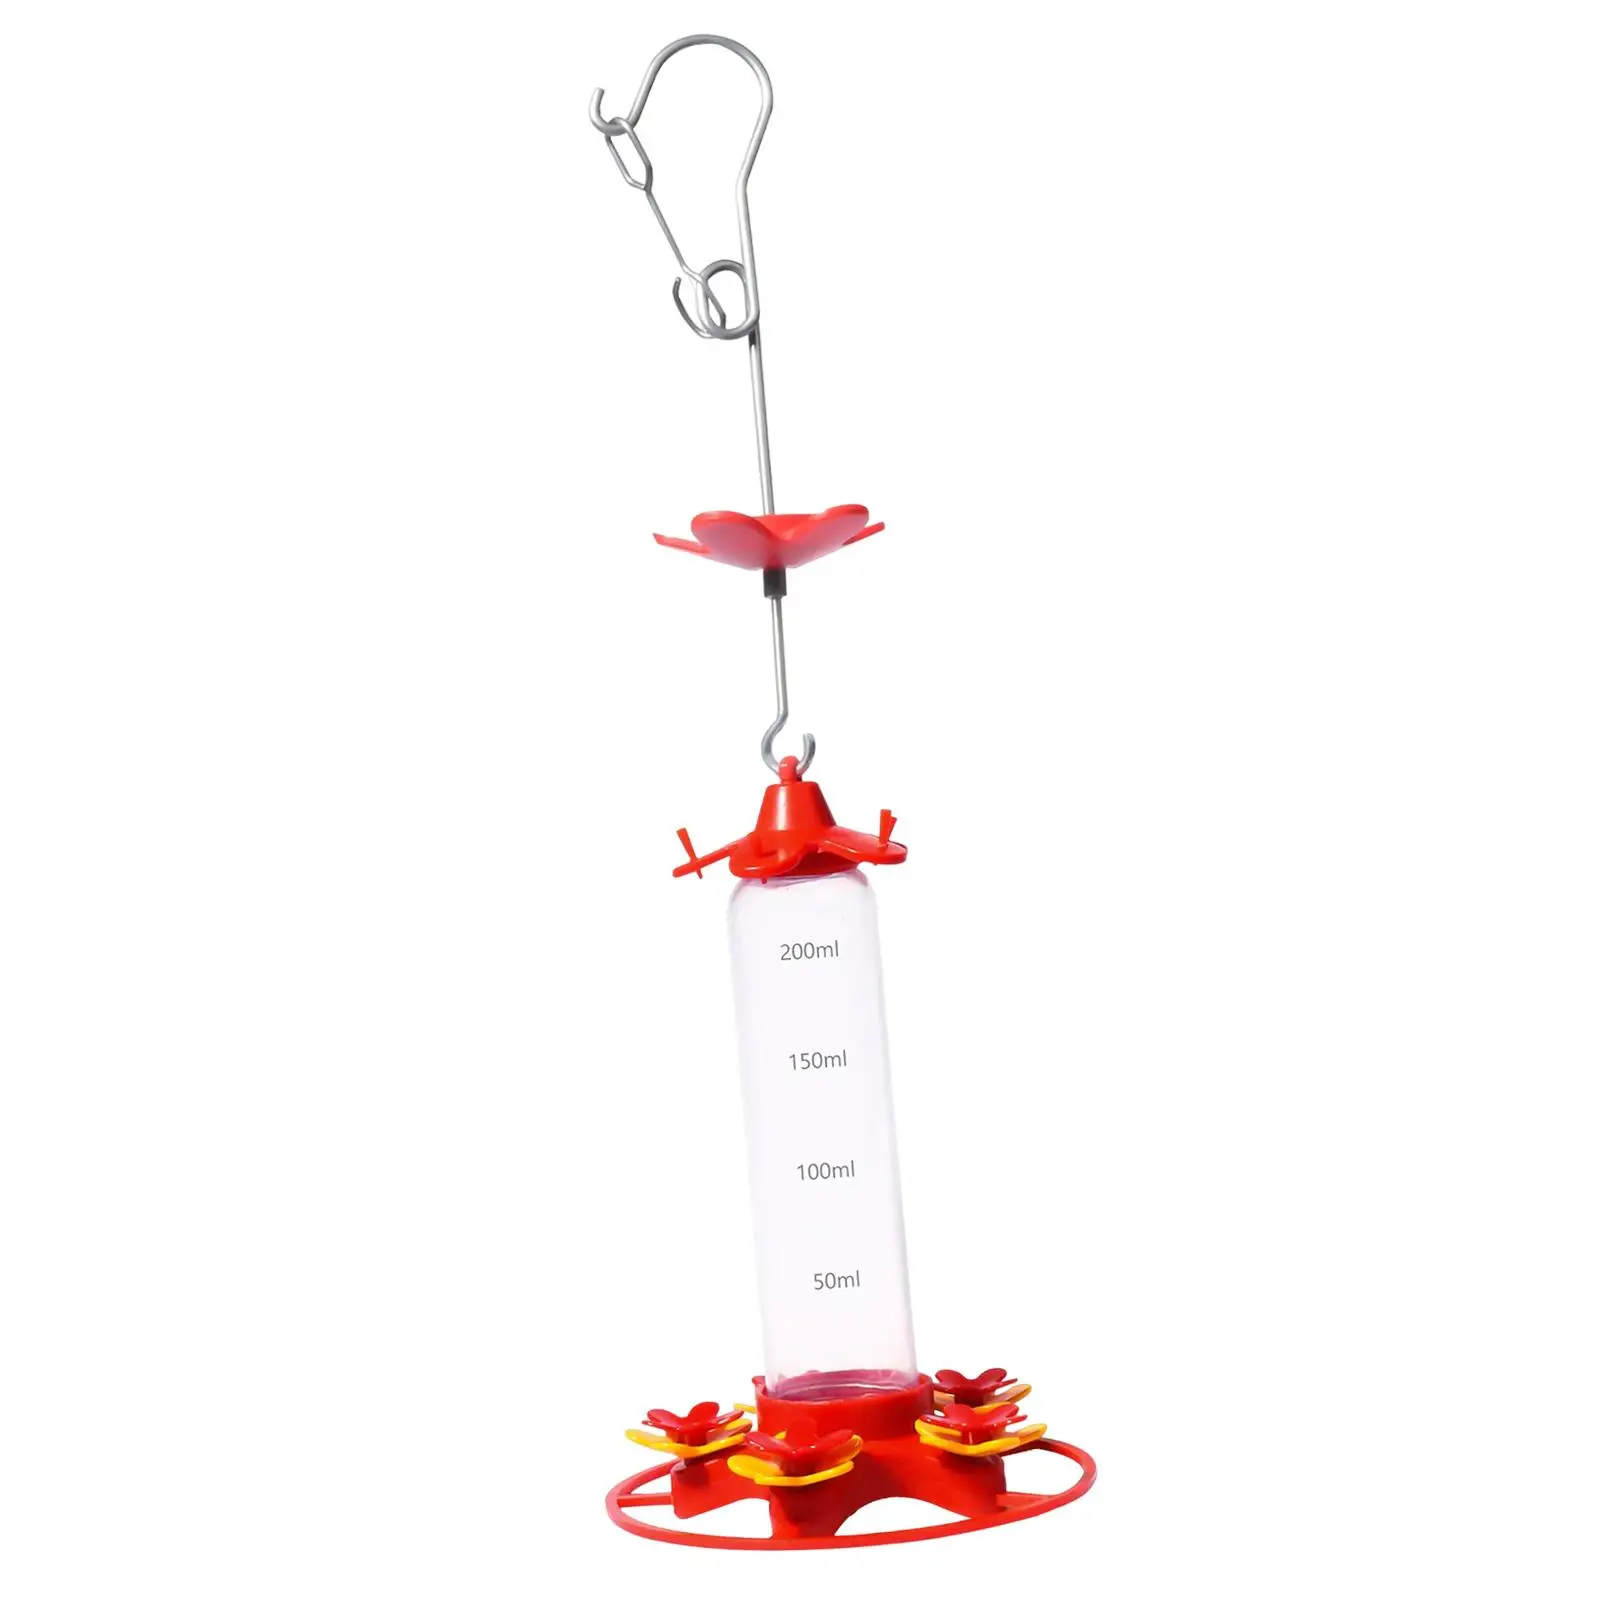 Bird Feeder 10 ounces Water Feeder Station Decoration Leakproof with Hook